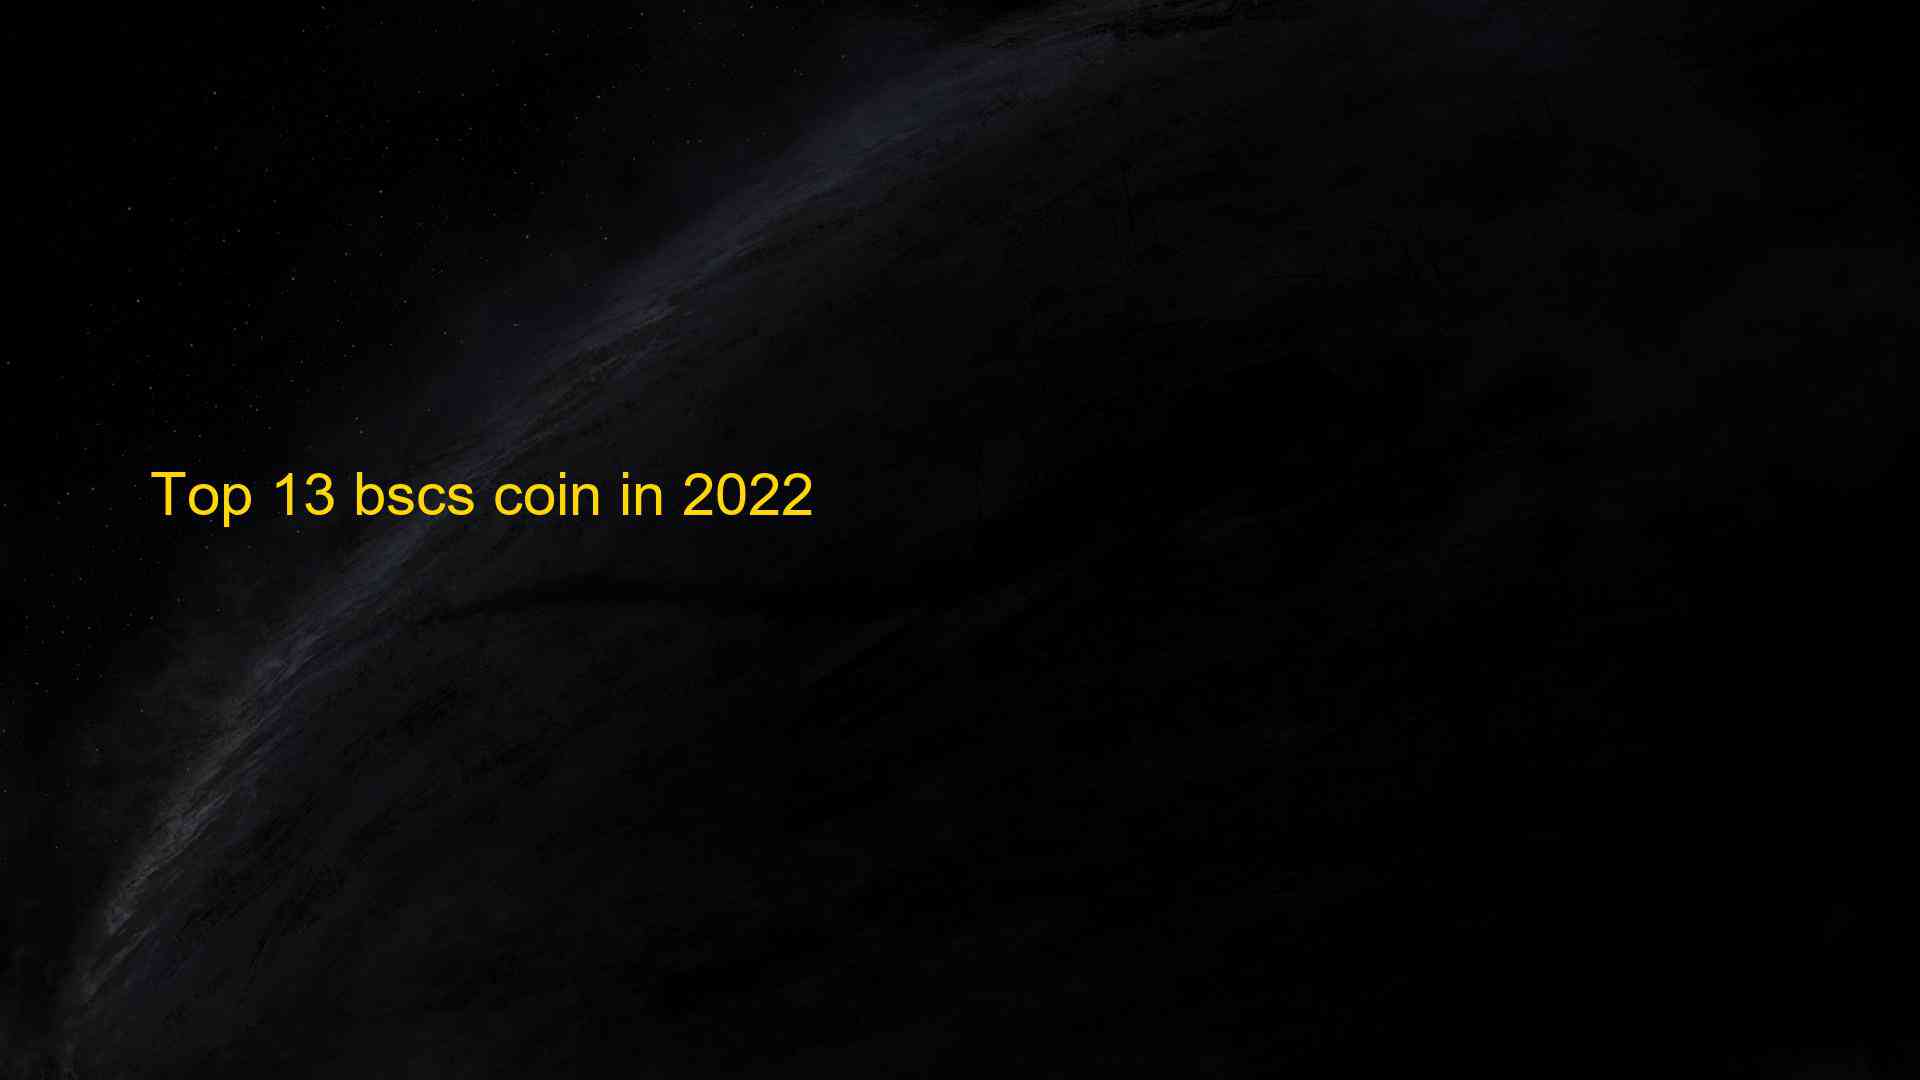 Top 13 bscs coin in 2022 1659571785